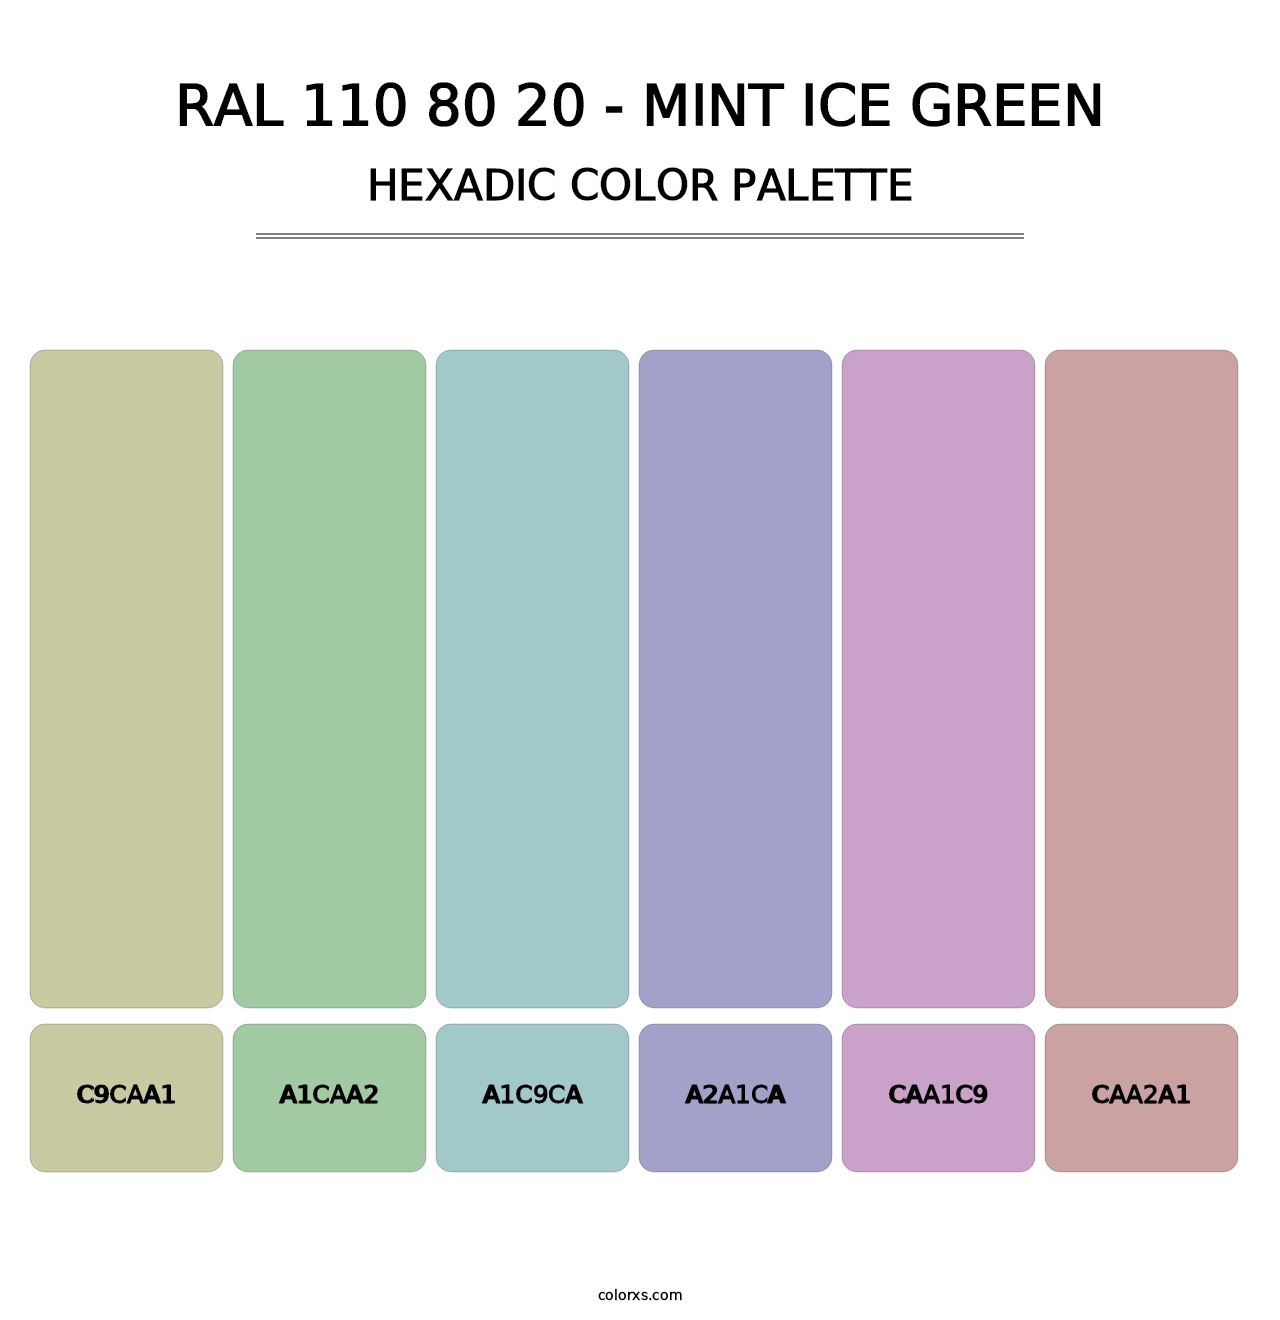 RAL 110 80 20 - Mint Ice Green - Hexadic Color Palette